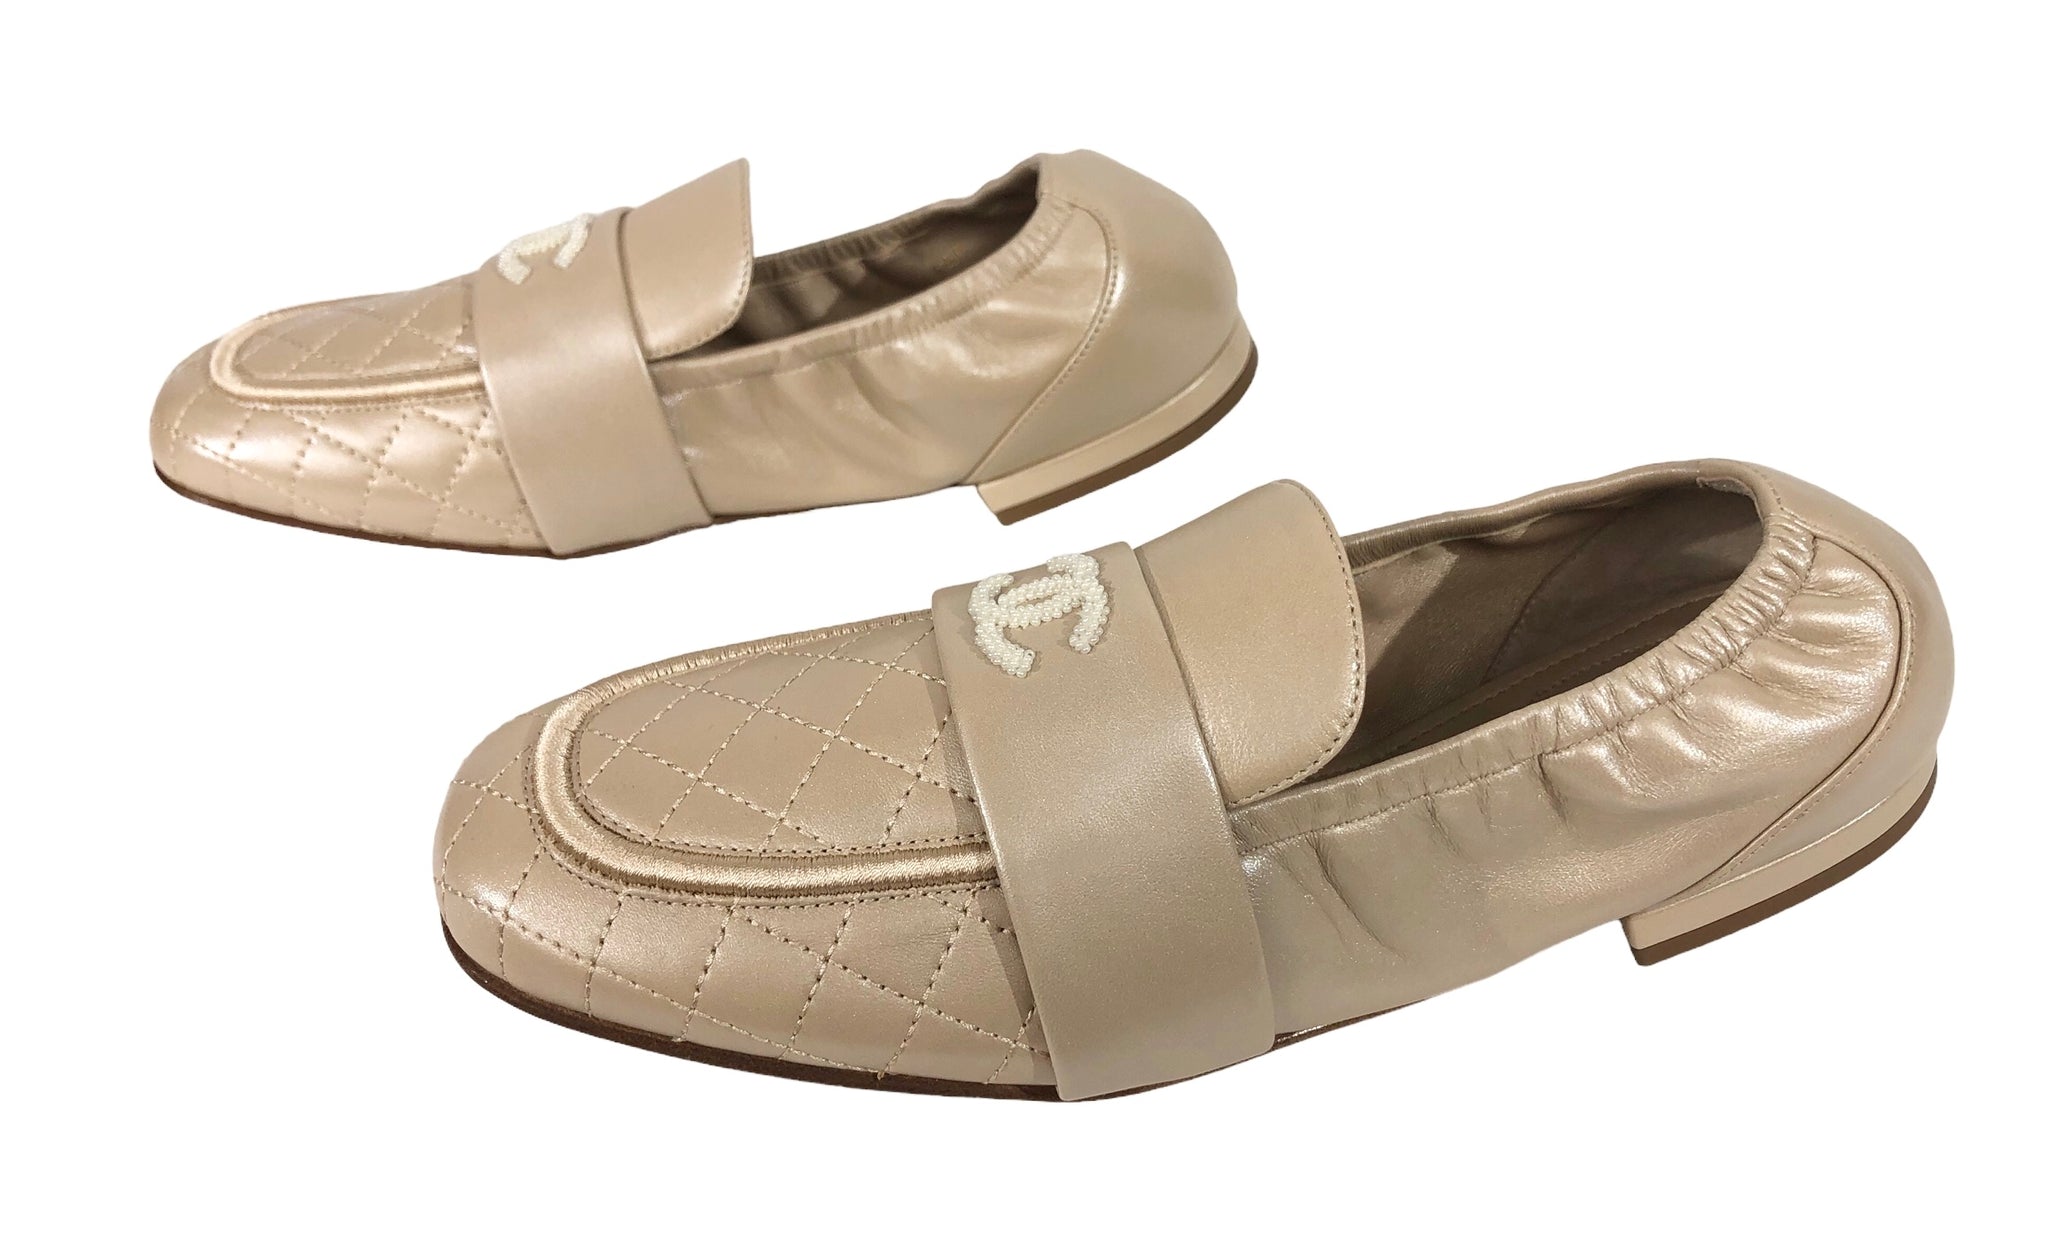 CHANEL Lambskin Quilted CC Turnlock Loafers 36.5 Beige 1083461